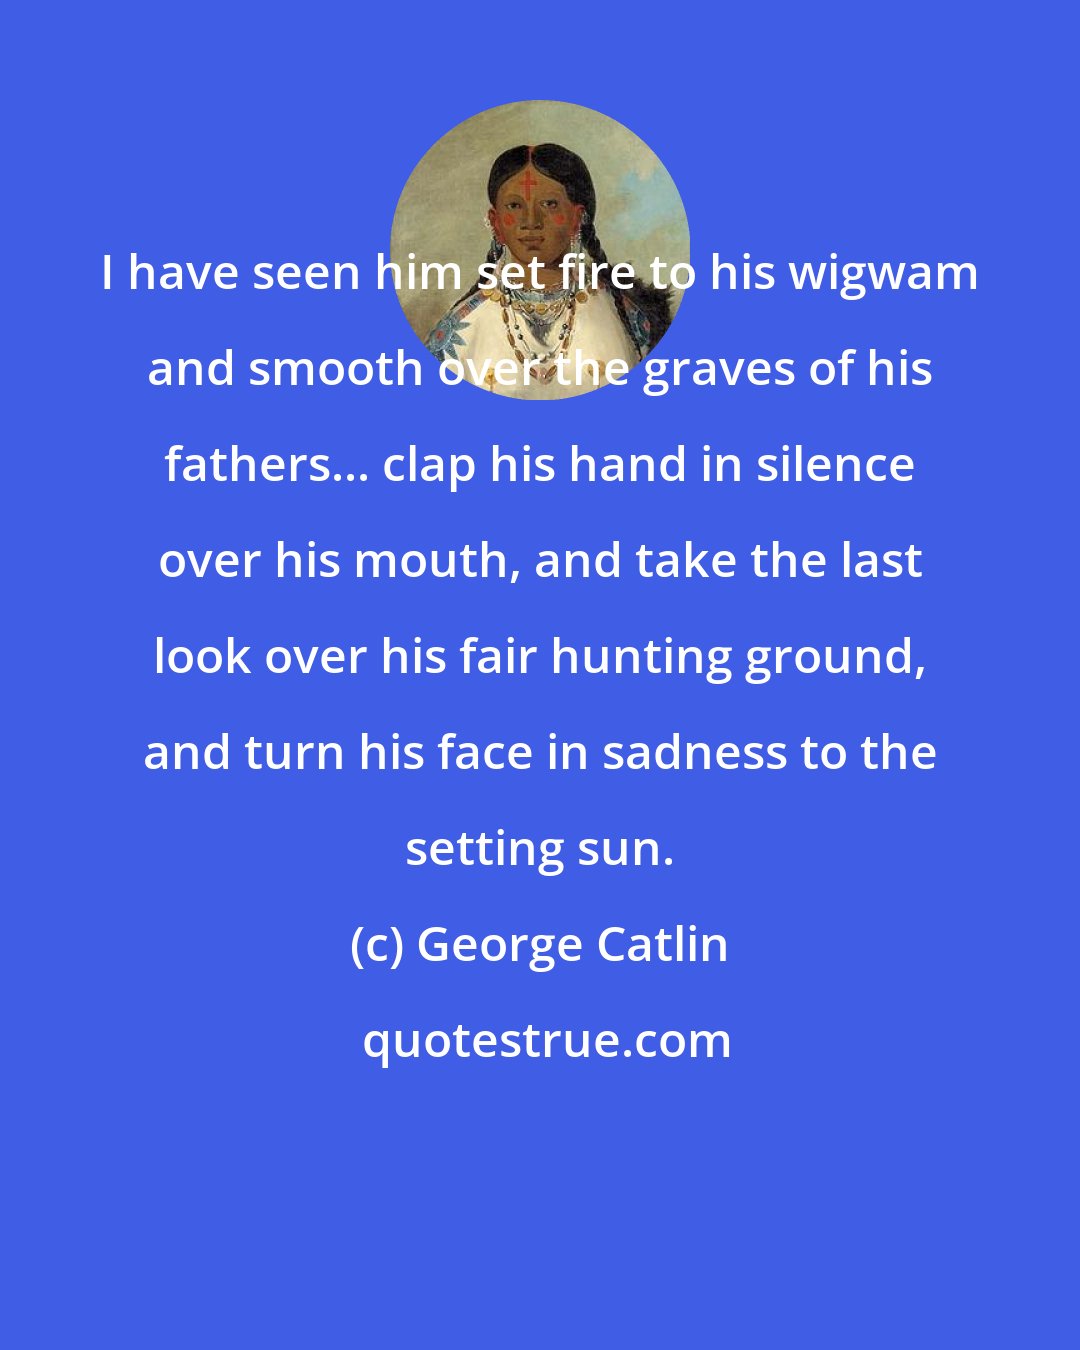 George Catlin: I have seen him set fire to his wigwam and smooth over the graves of his fathers... clap his hand in silence over his mouth, and take the last look over his fair hunting ground, and turn his face in sadness to the setting sun.